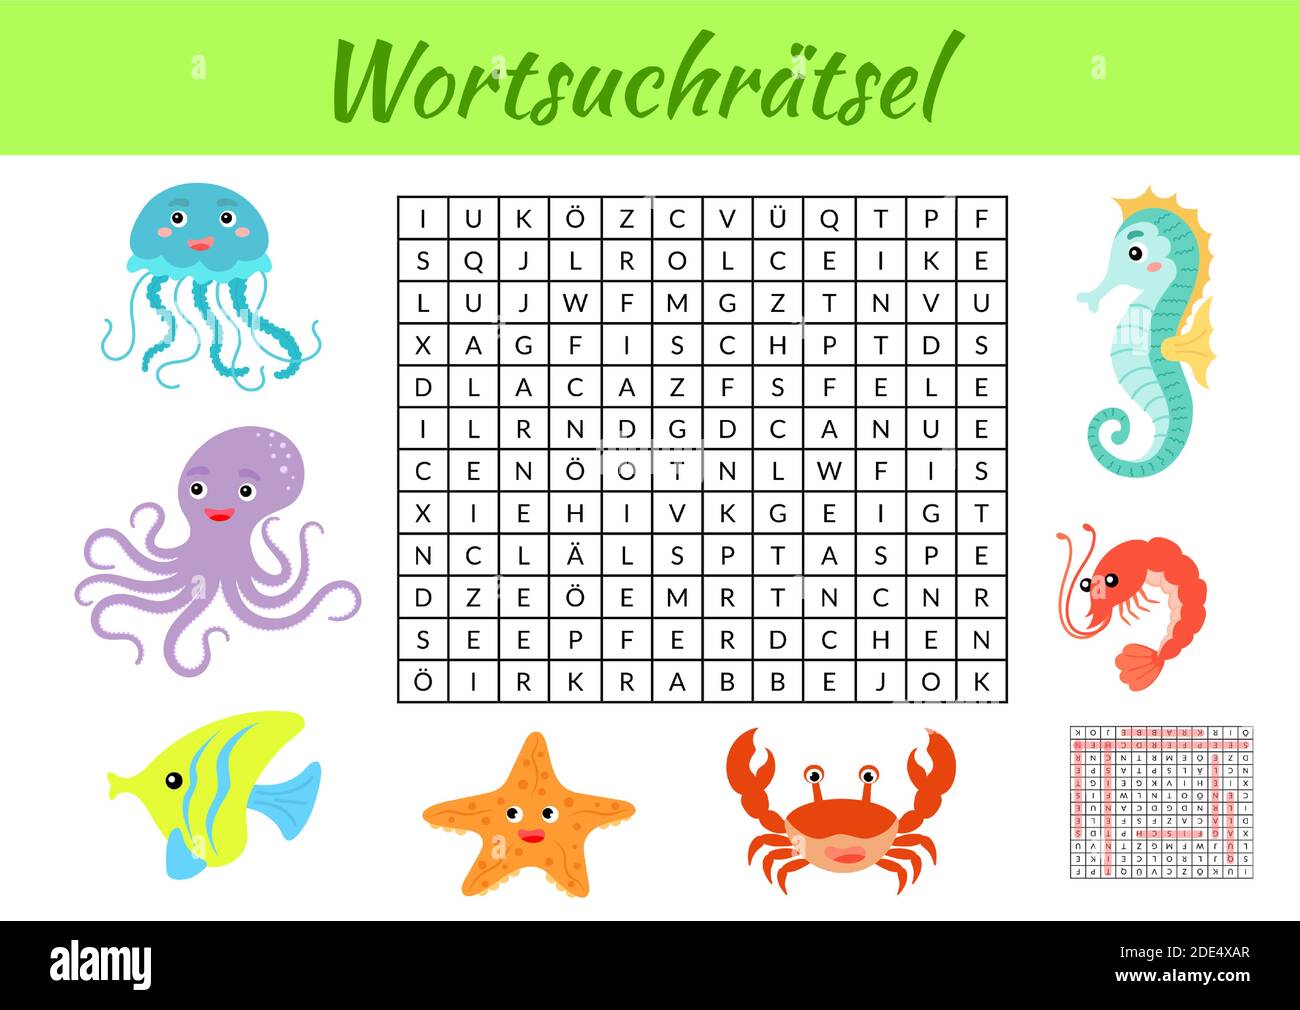 Wortsuchrätsel - Word search puzzle. Kids activity worksheet colorful printable version. Educational game for study German words. Includes answers. Stock Vector